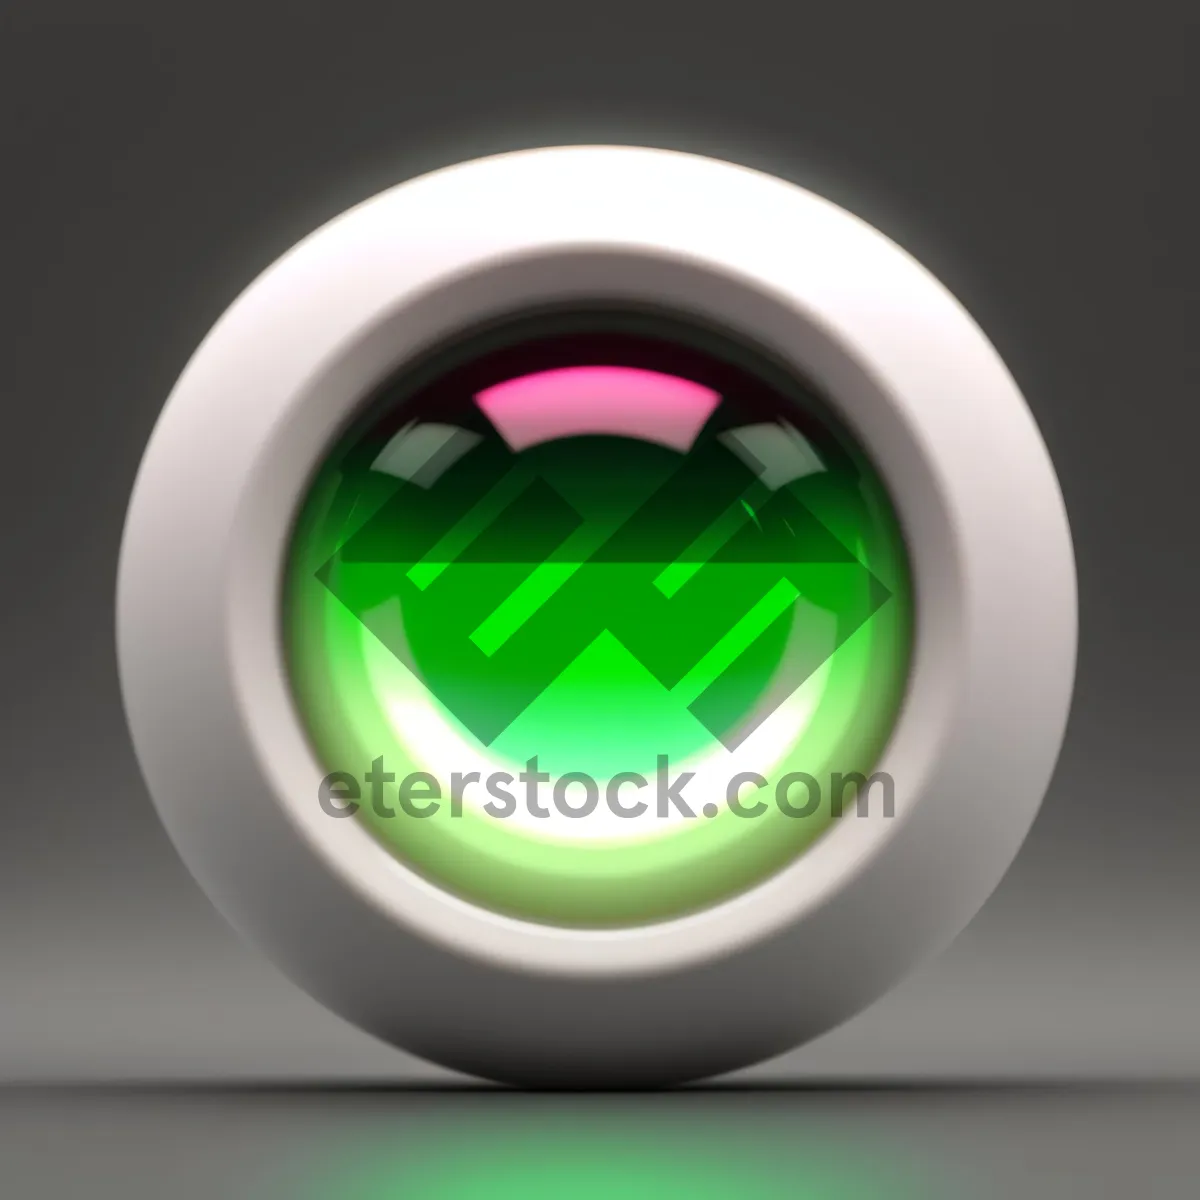 Picture of Sleek Glass Web Buttons in Modern Design